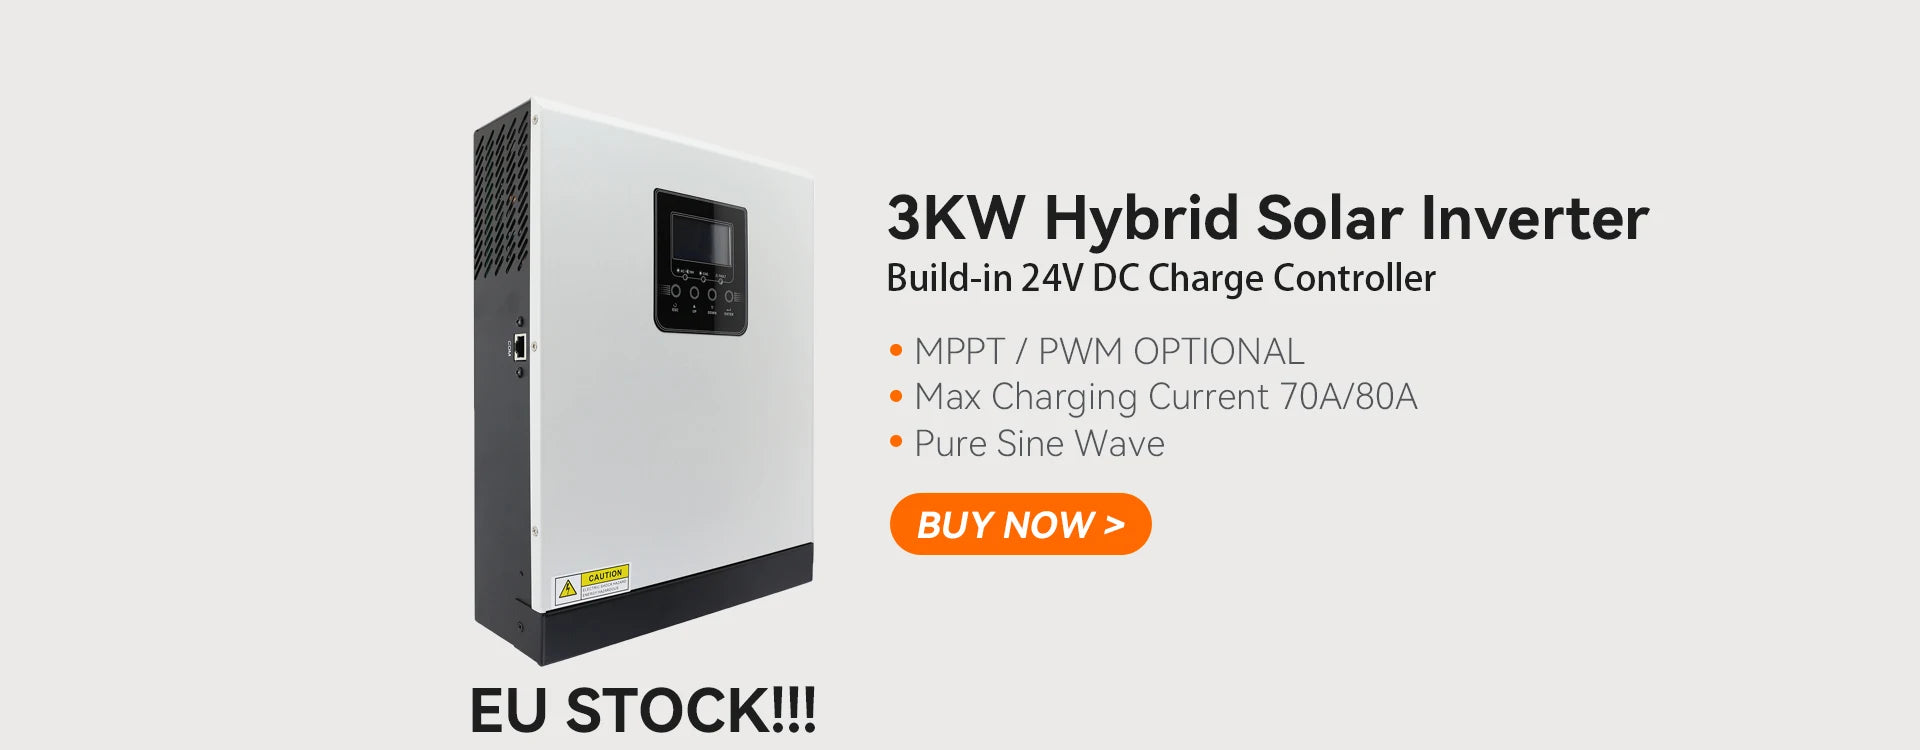 PowMr Hybrid Solar Inverter, Hybrid solar inverter with MPPT charger, pure sine wave output, and optional PWM control, available now.